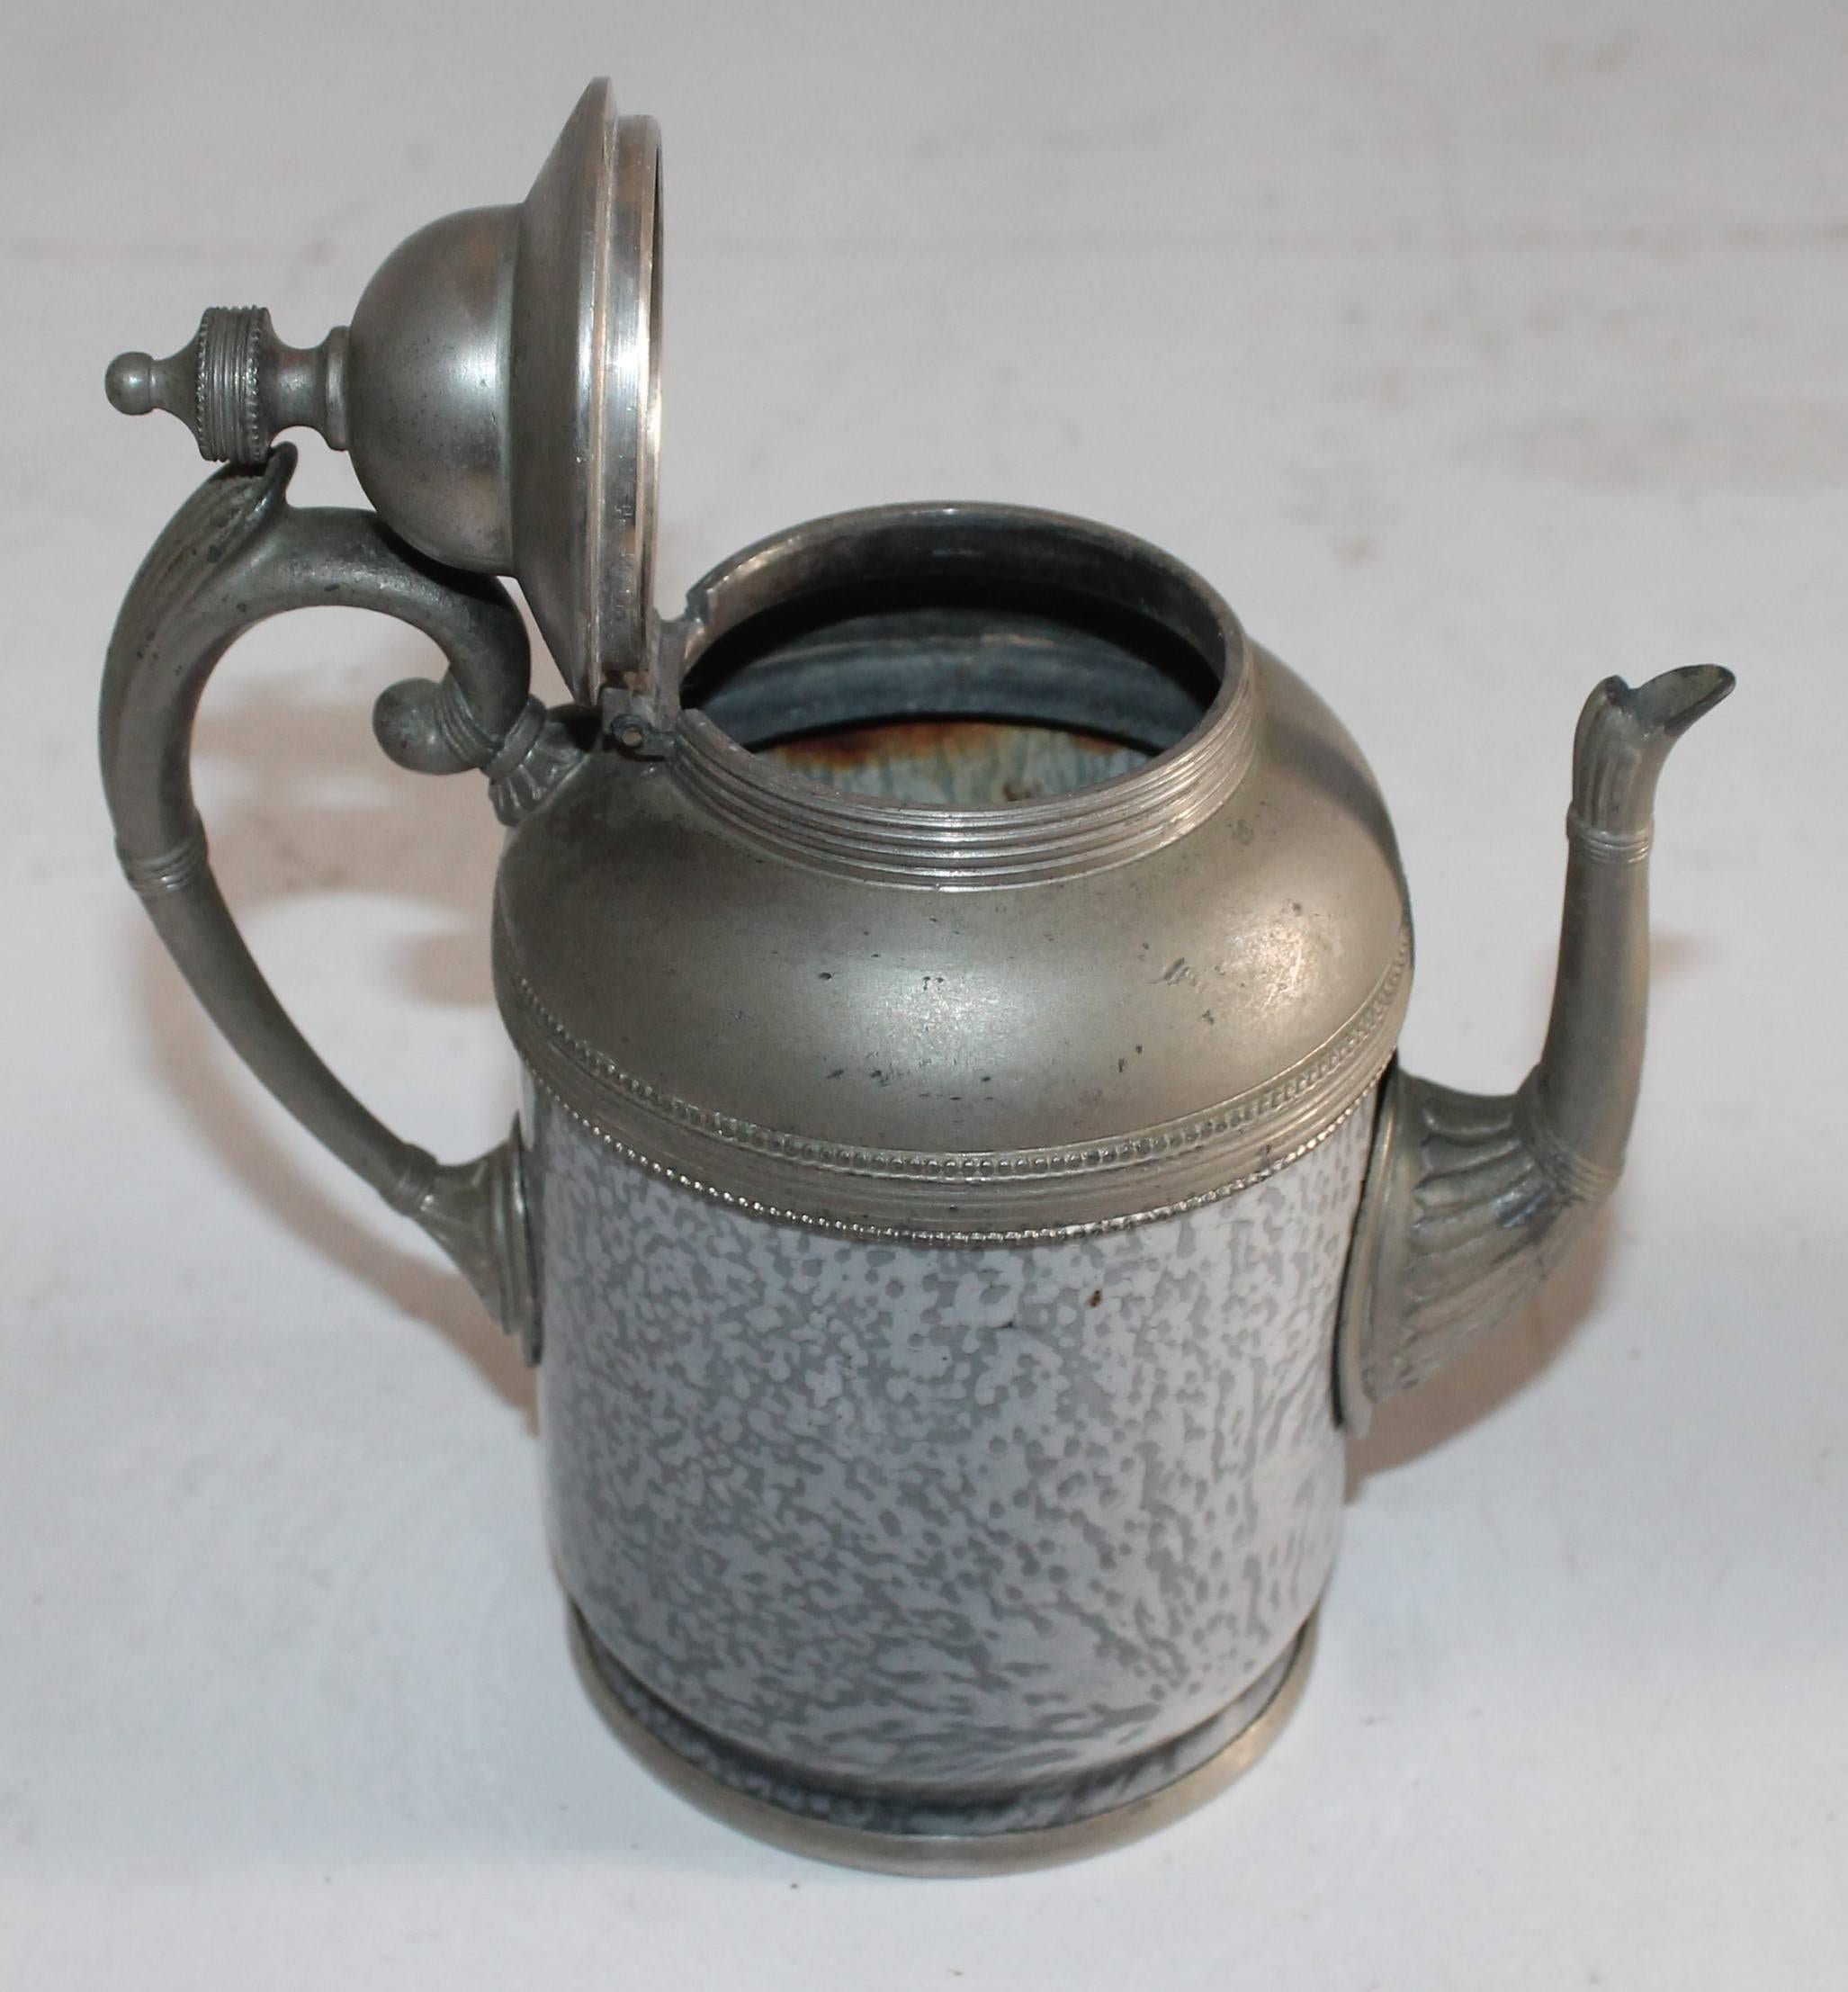 Enameled Rare 19th Century Granite and Pewter One Cup Tea Pot and Mug